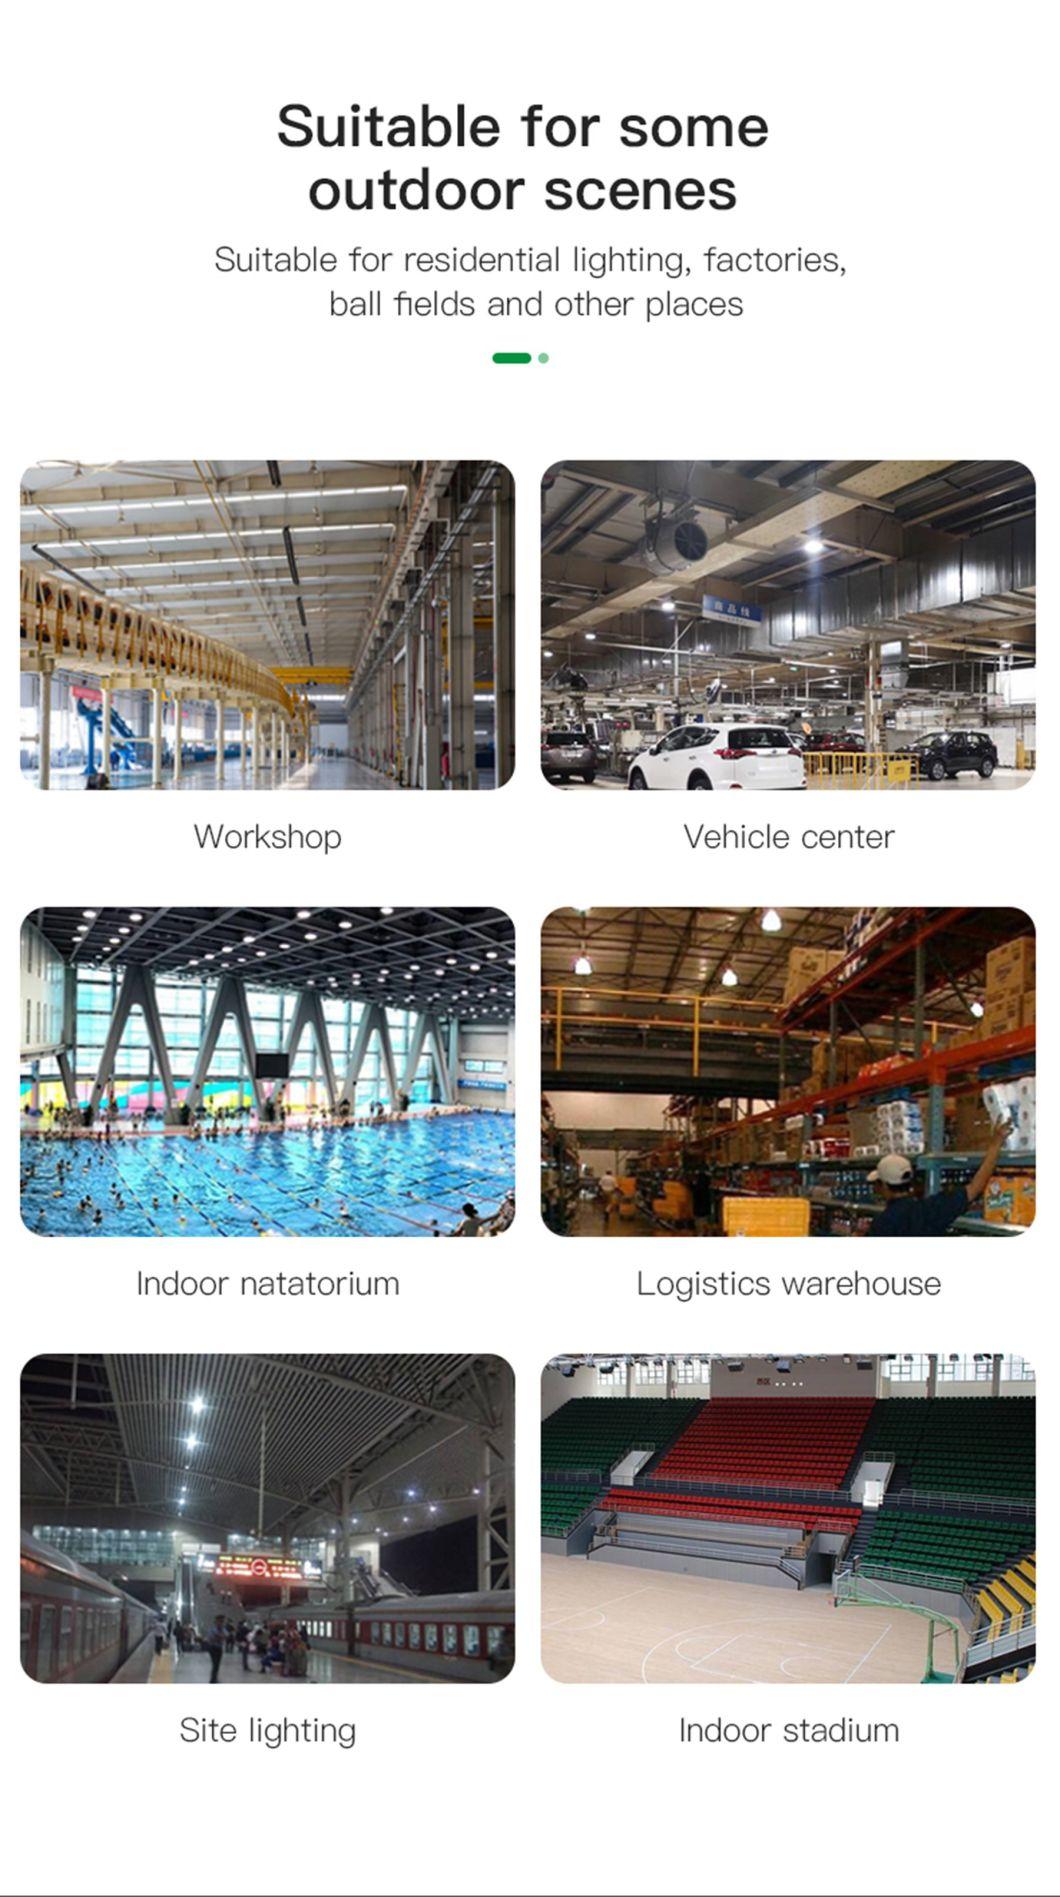 High Quality LED High Bay Light Manufacturers Explosion Proof LED Light